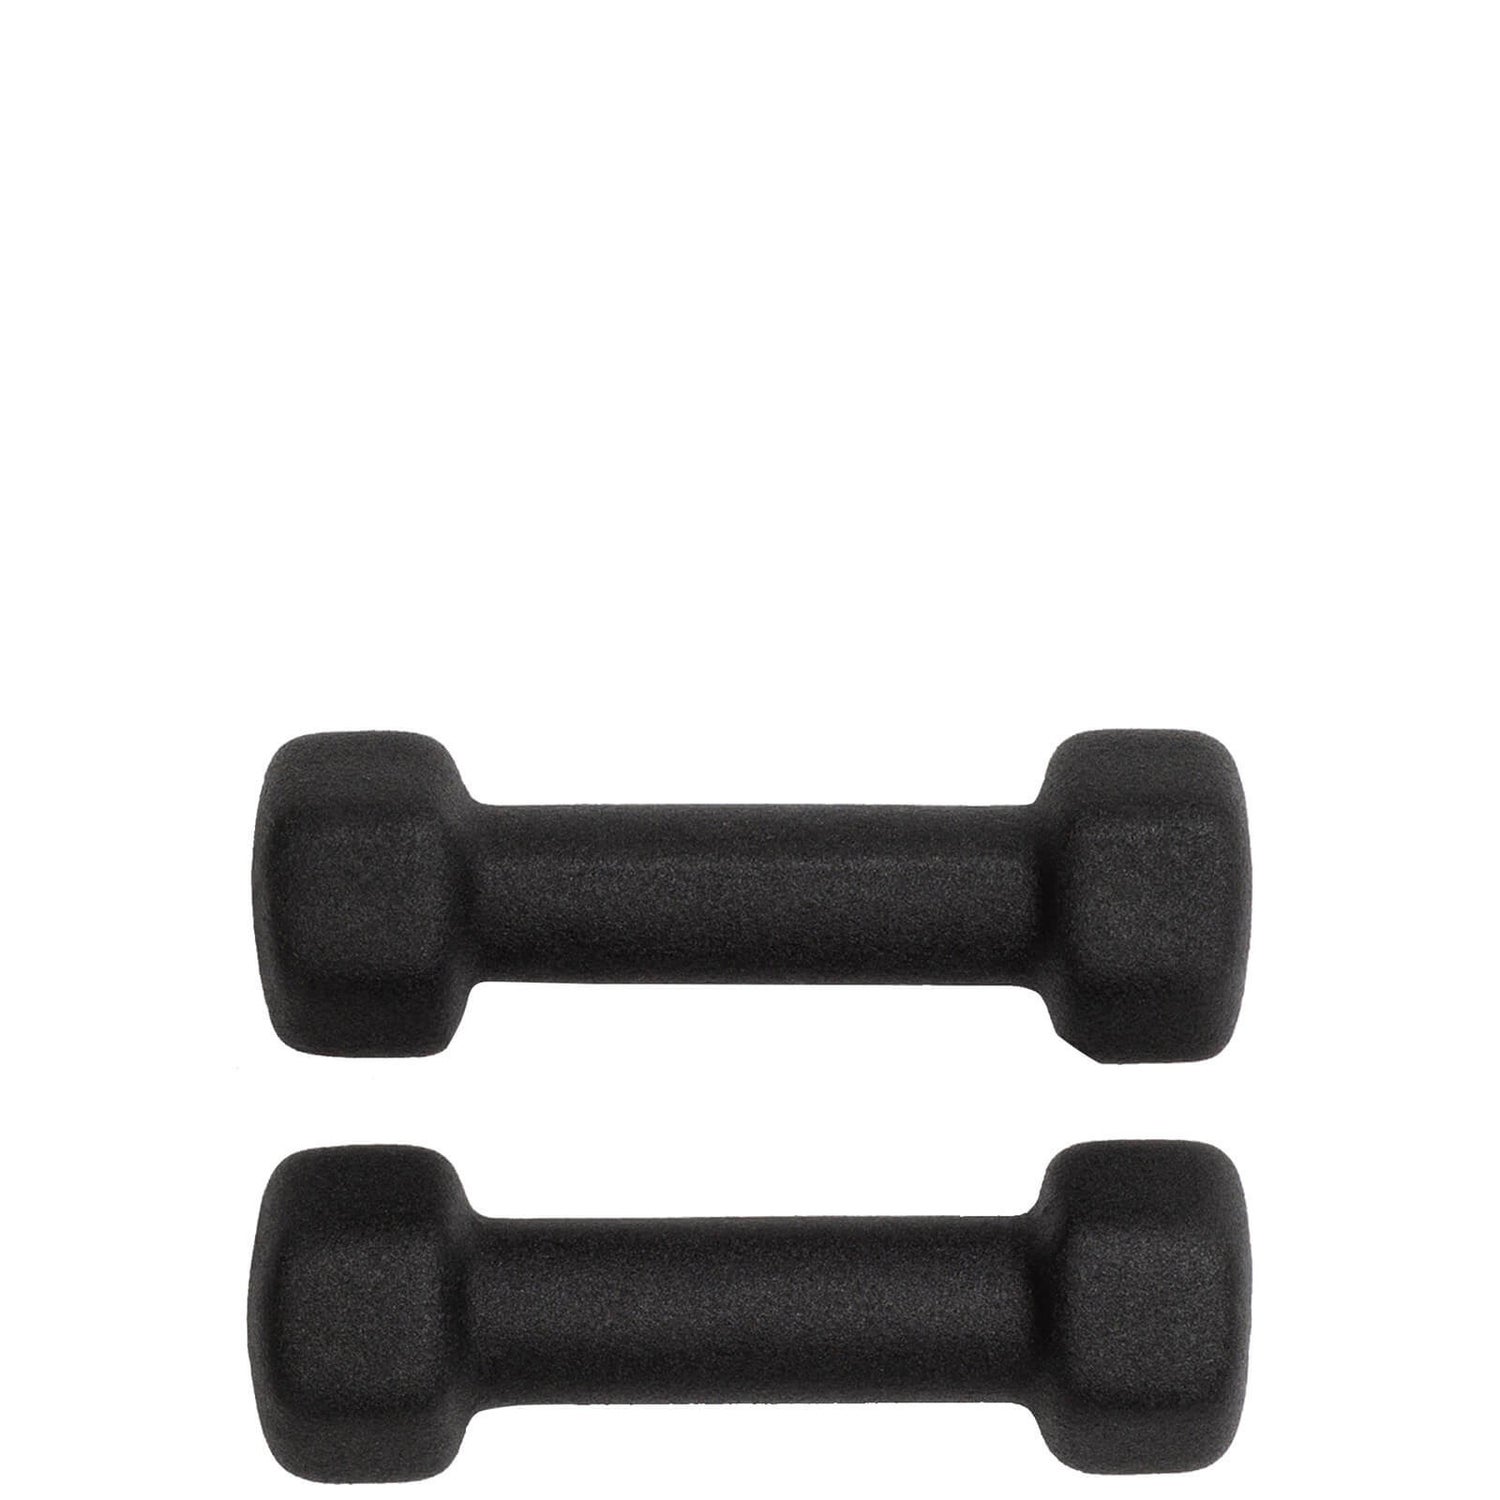 P.volve 2lb Hand Weights